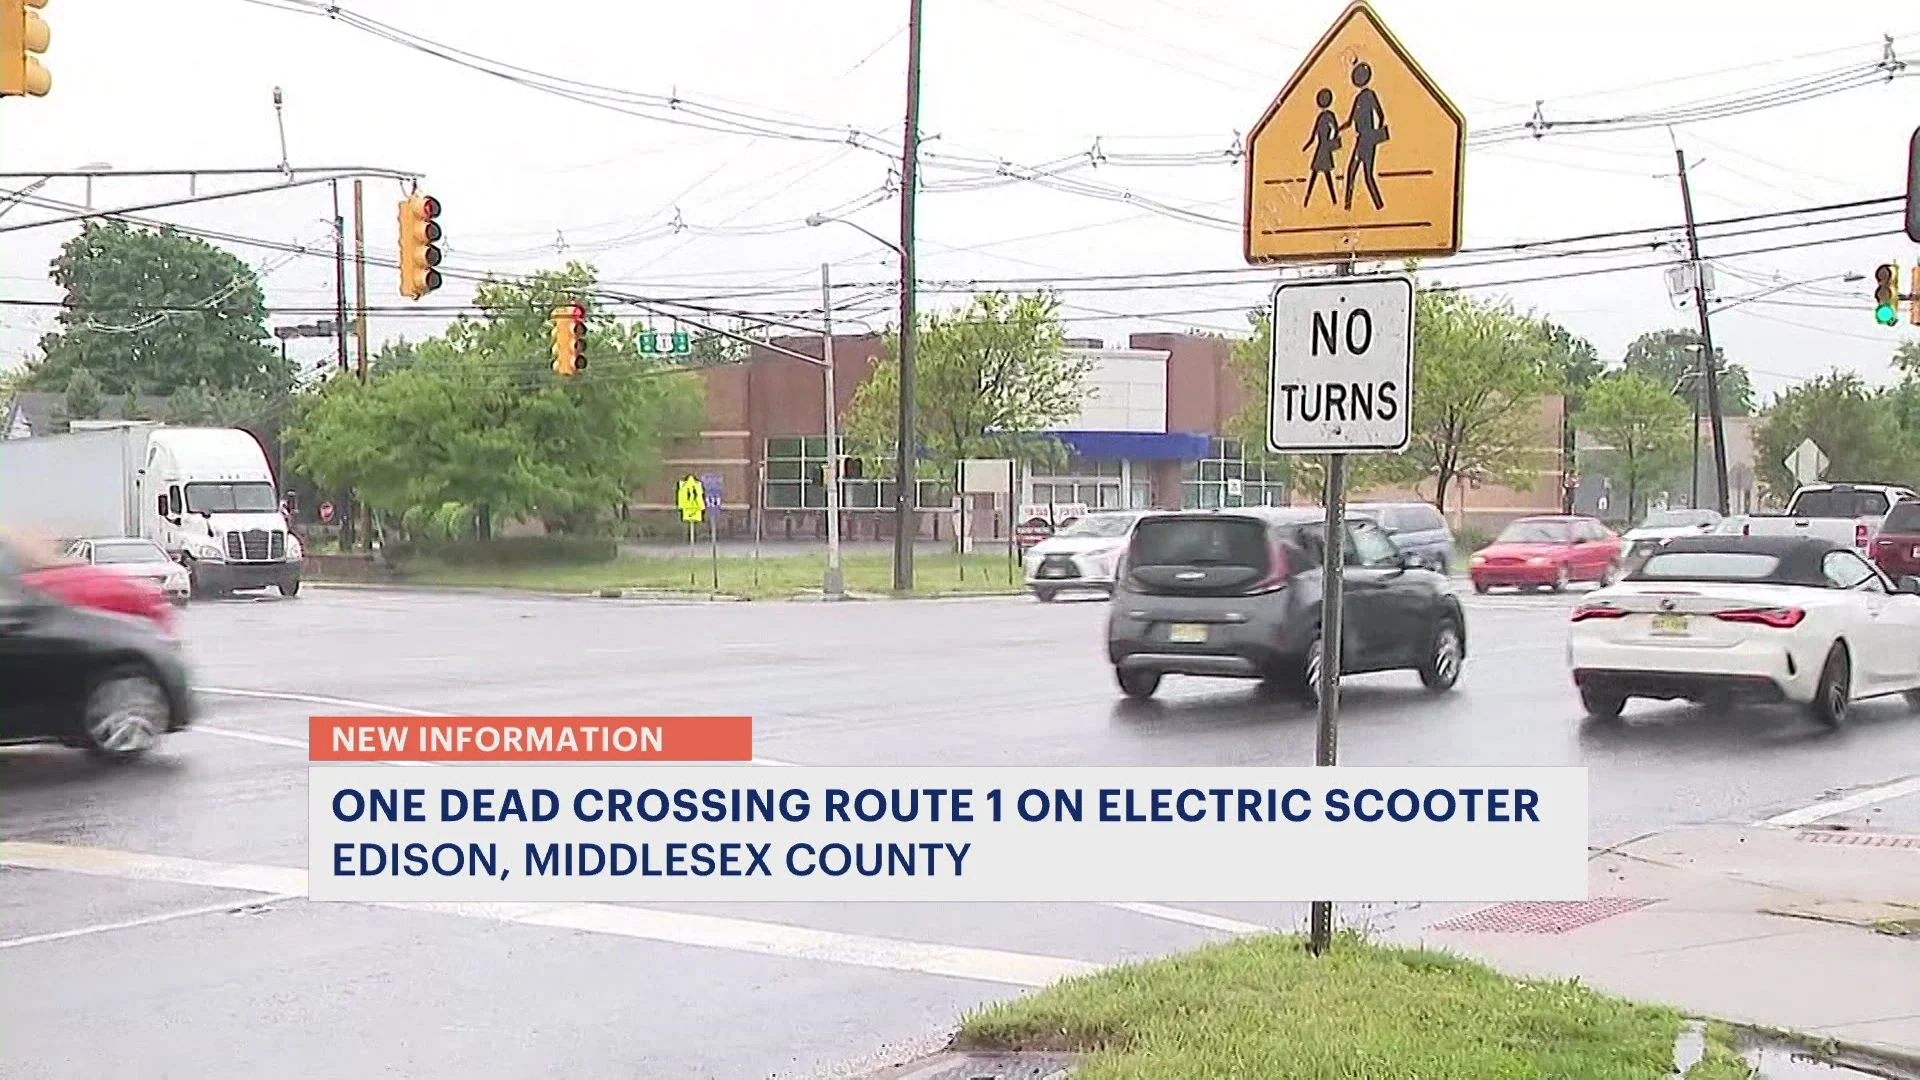 Police: 22-year-old man on electric scooter killed in crash on Route 1 in Edison